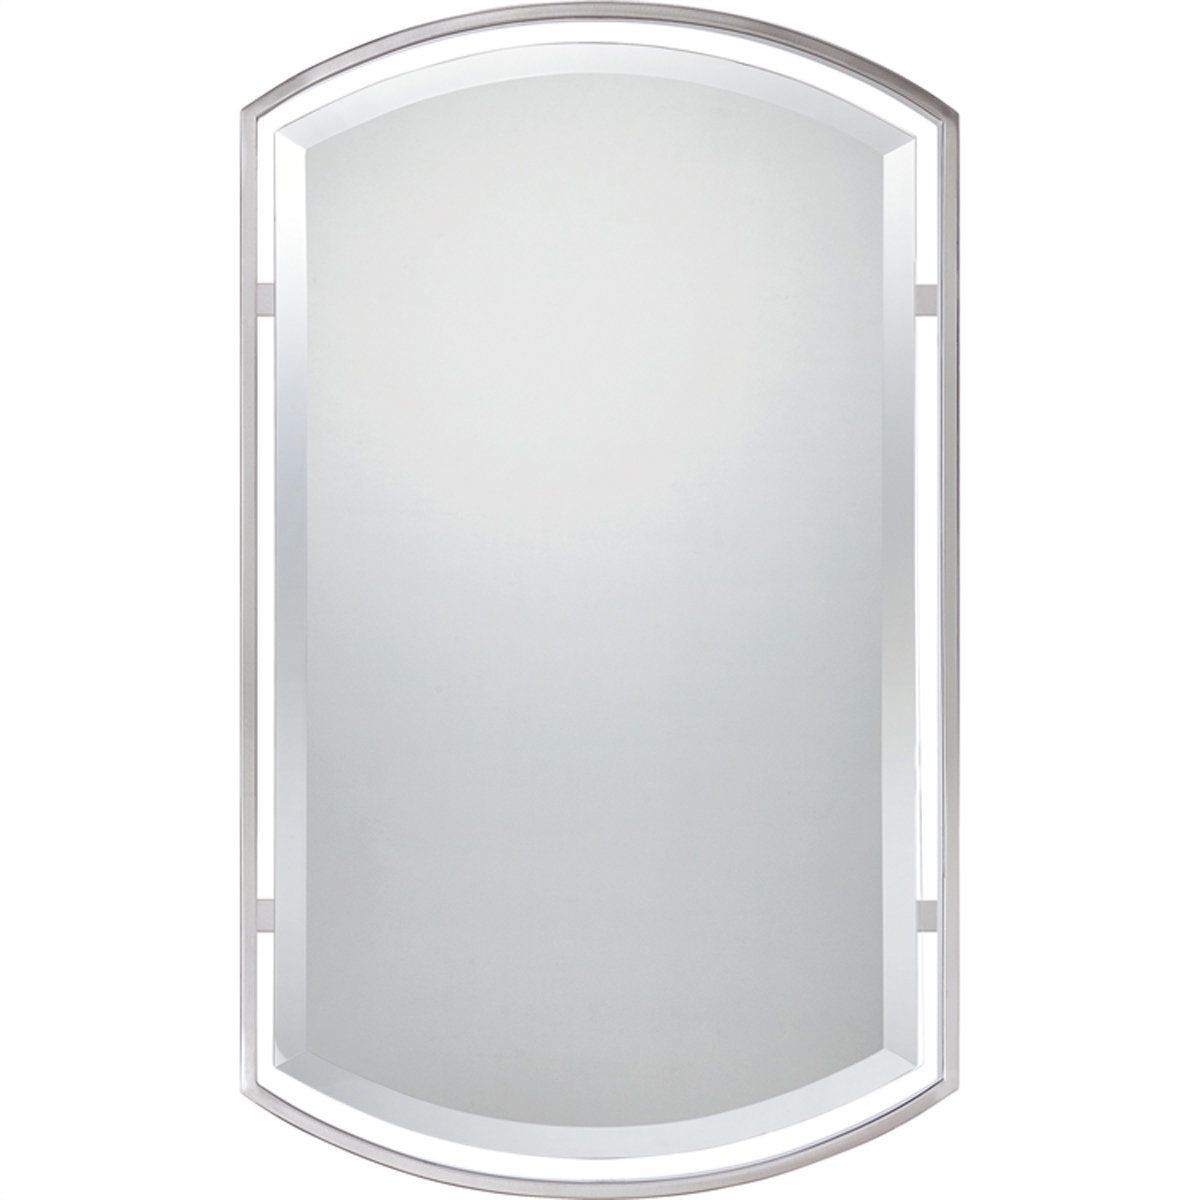 Floating Frame Rounded Rectangular Mirror In 2021 | Brushed Nickel Within Brushed Nickel Rectangular Wall Mirrors (View 11 of 15)